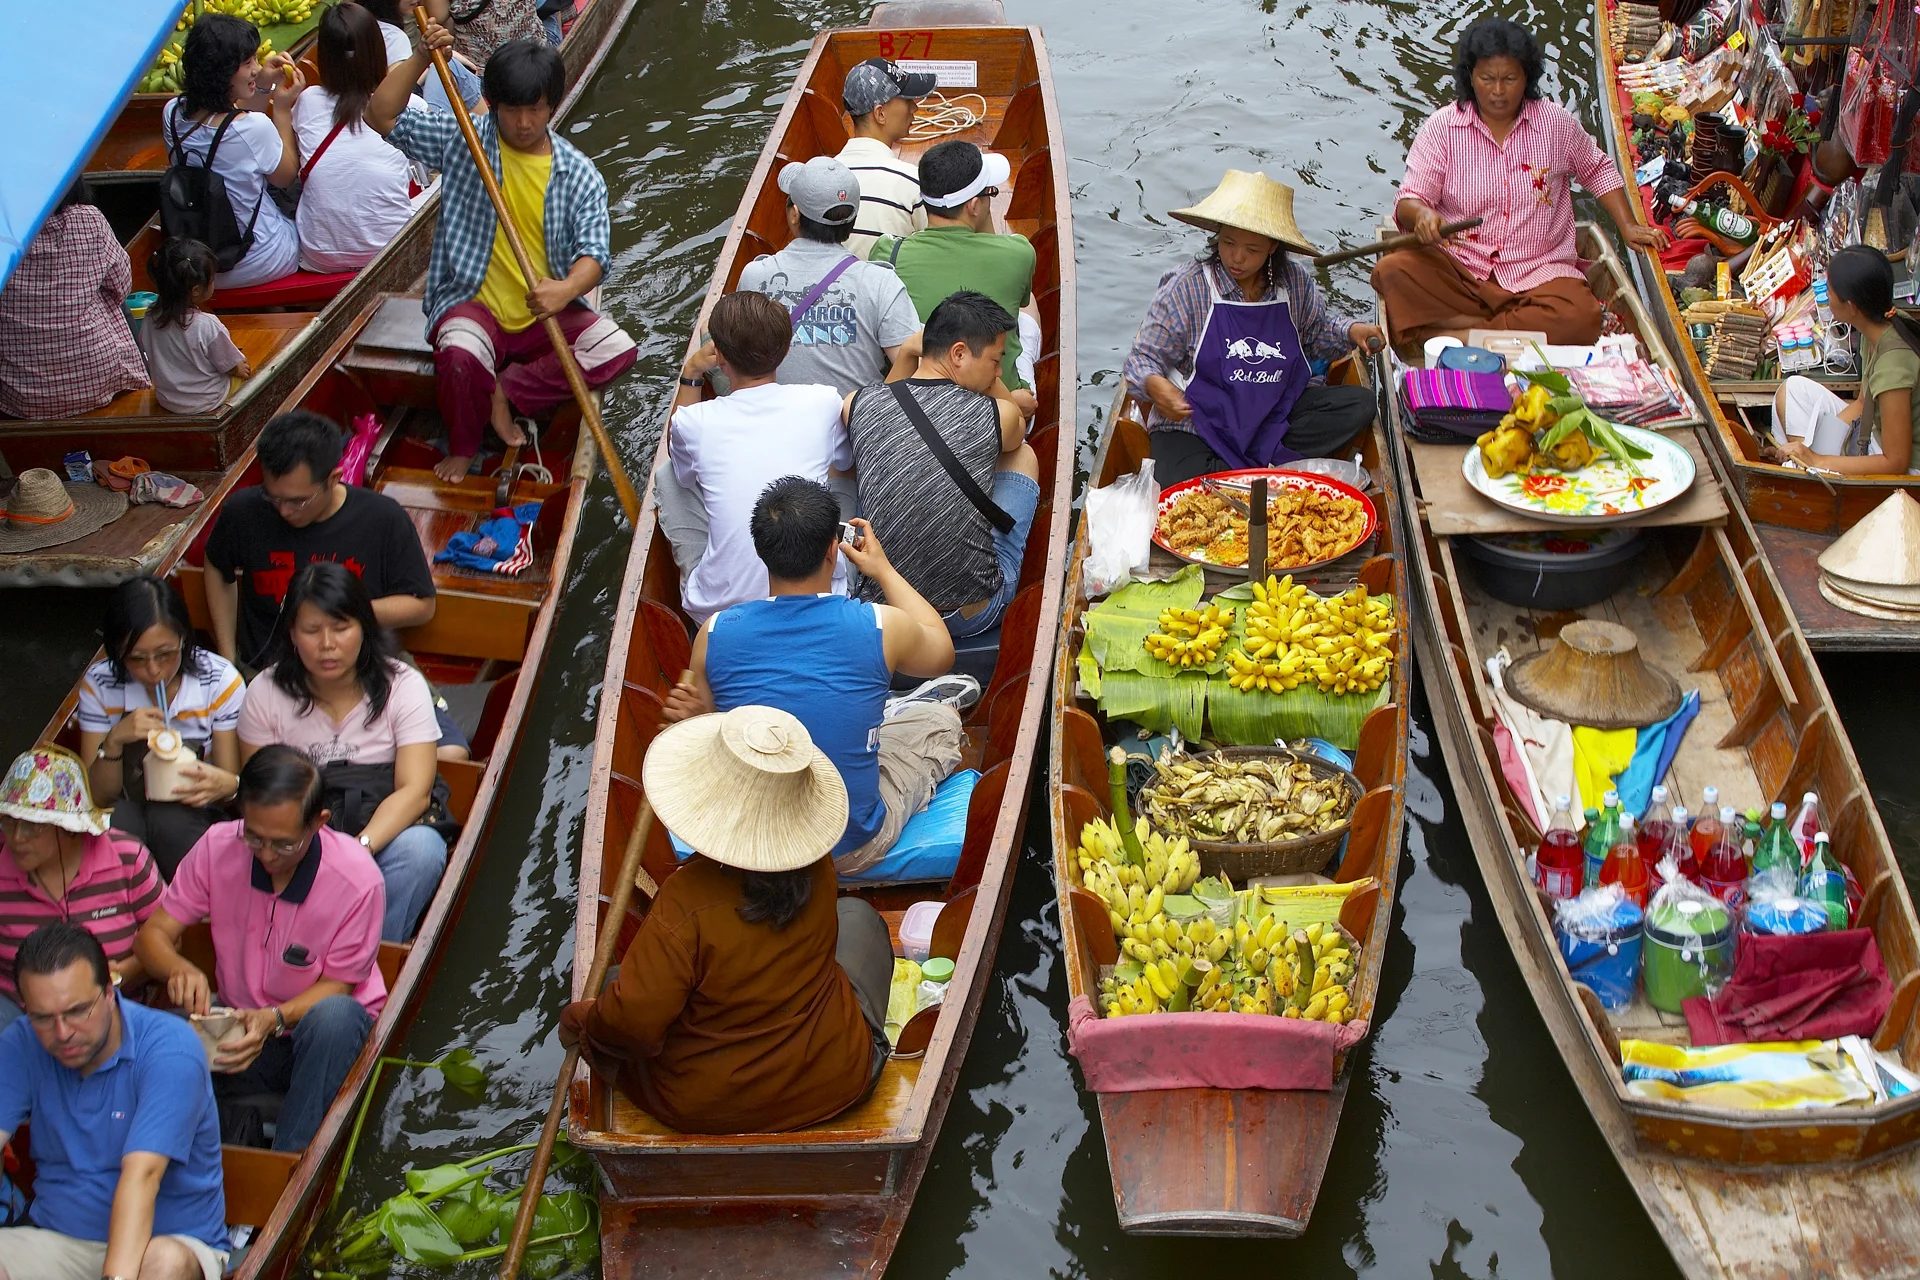 Thailand market people on boats